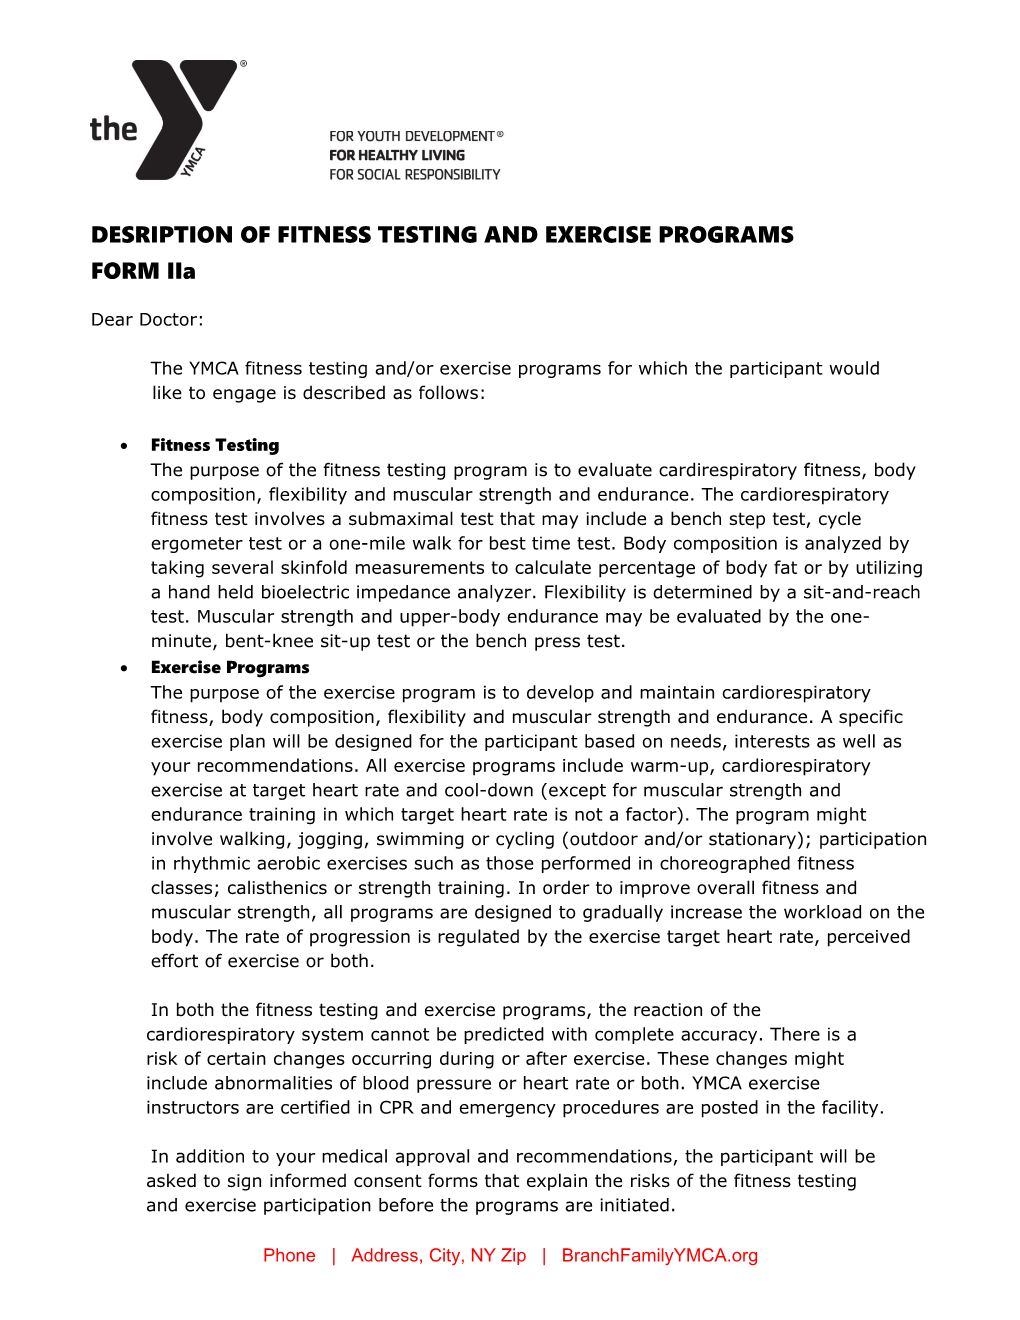 Desription of Fitness Testing and Exercise Programs